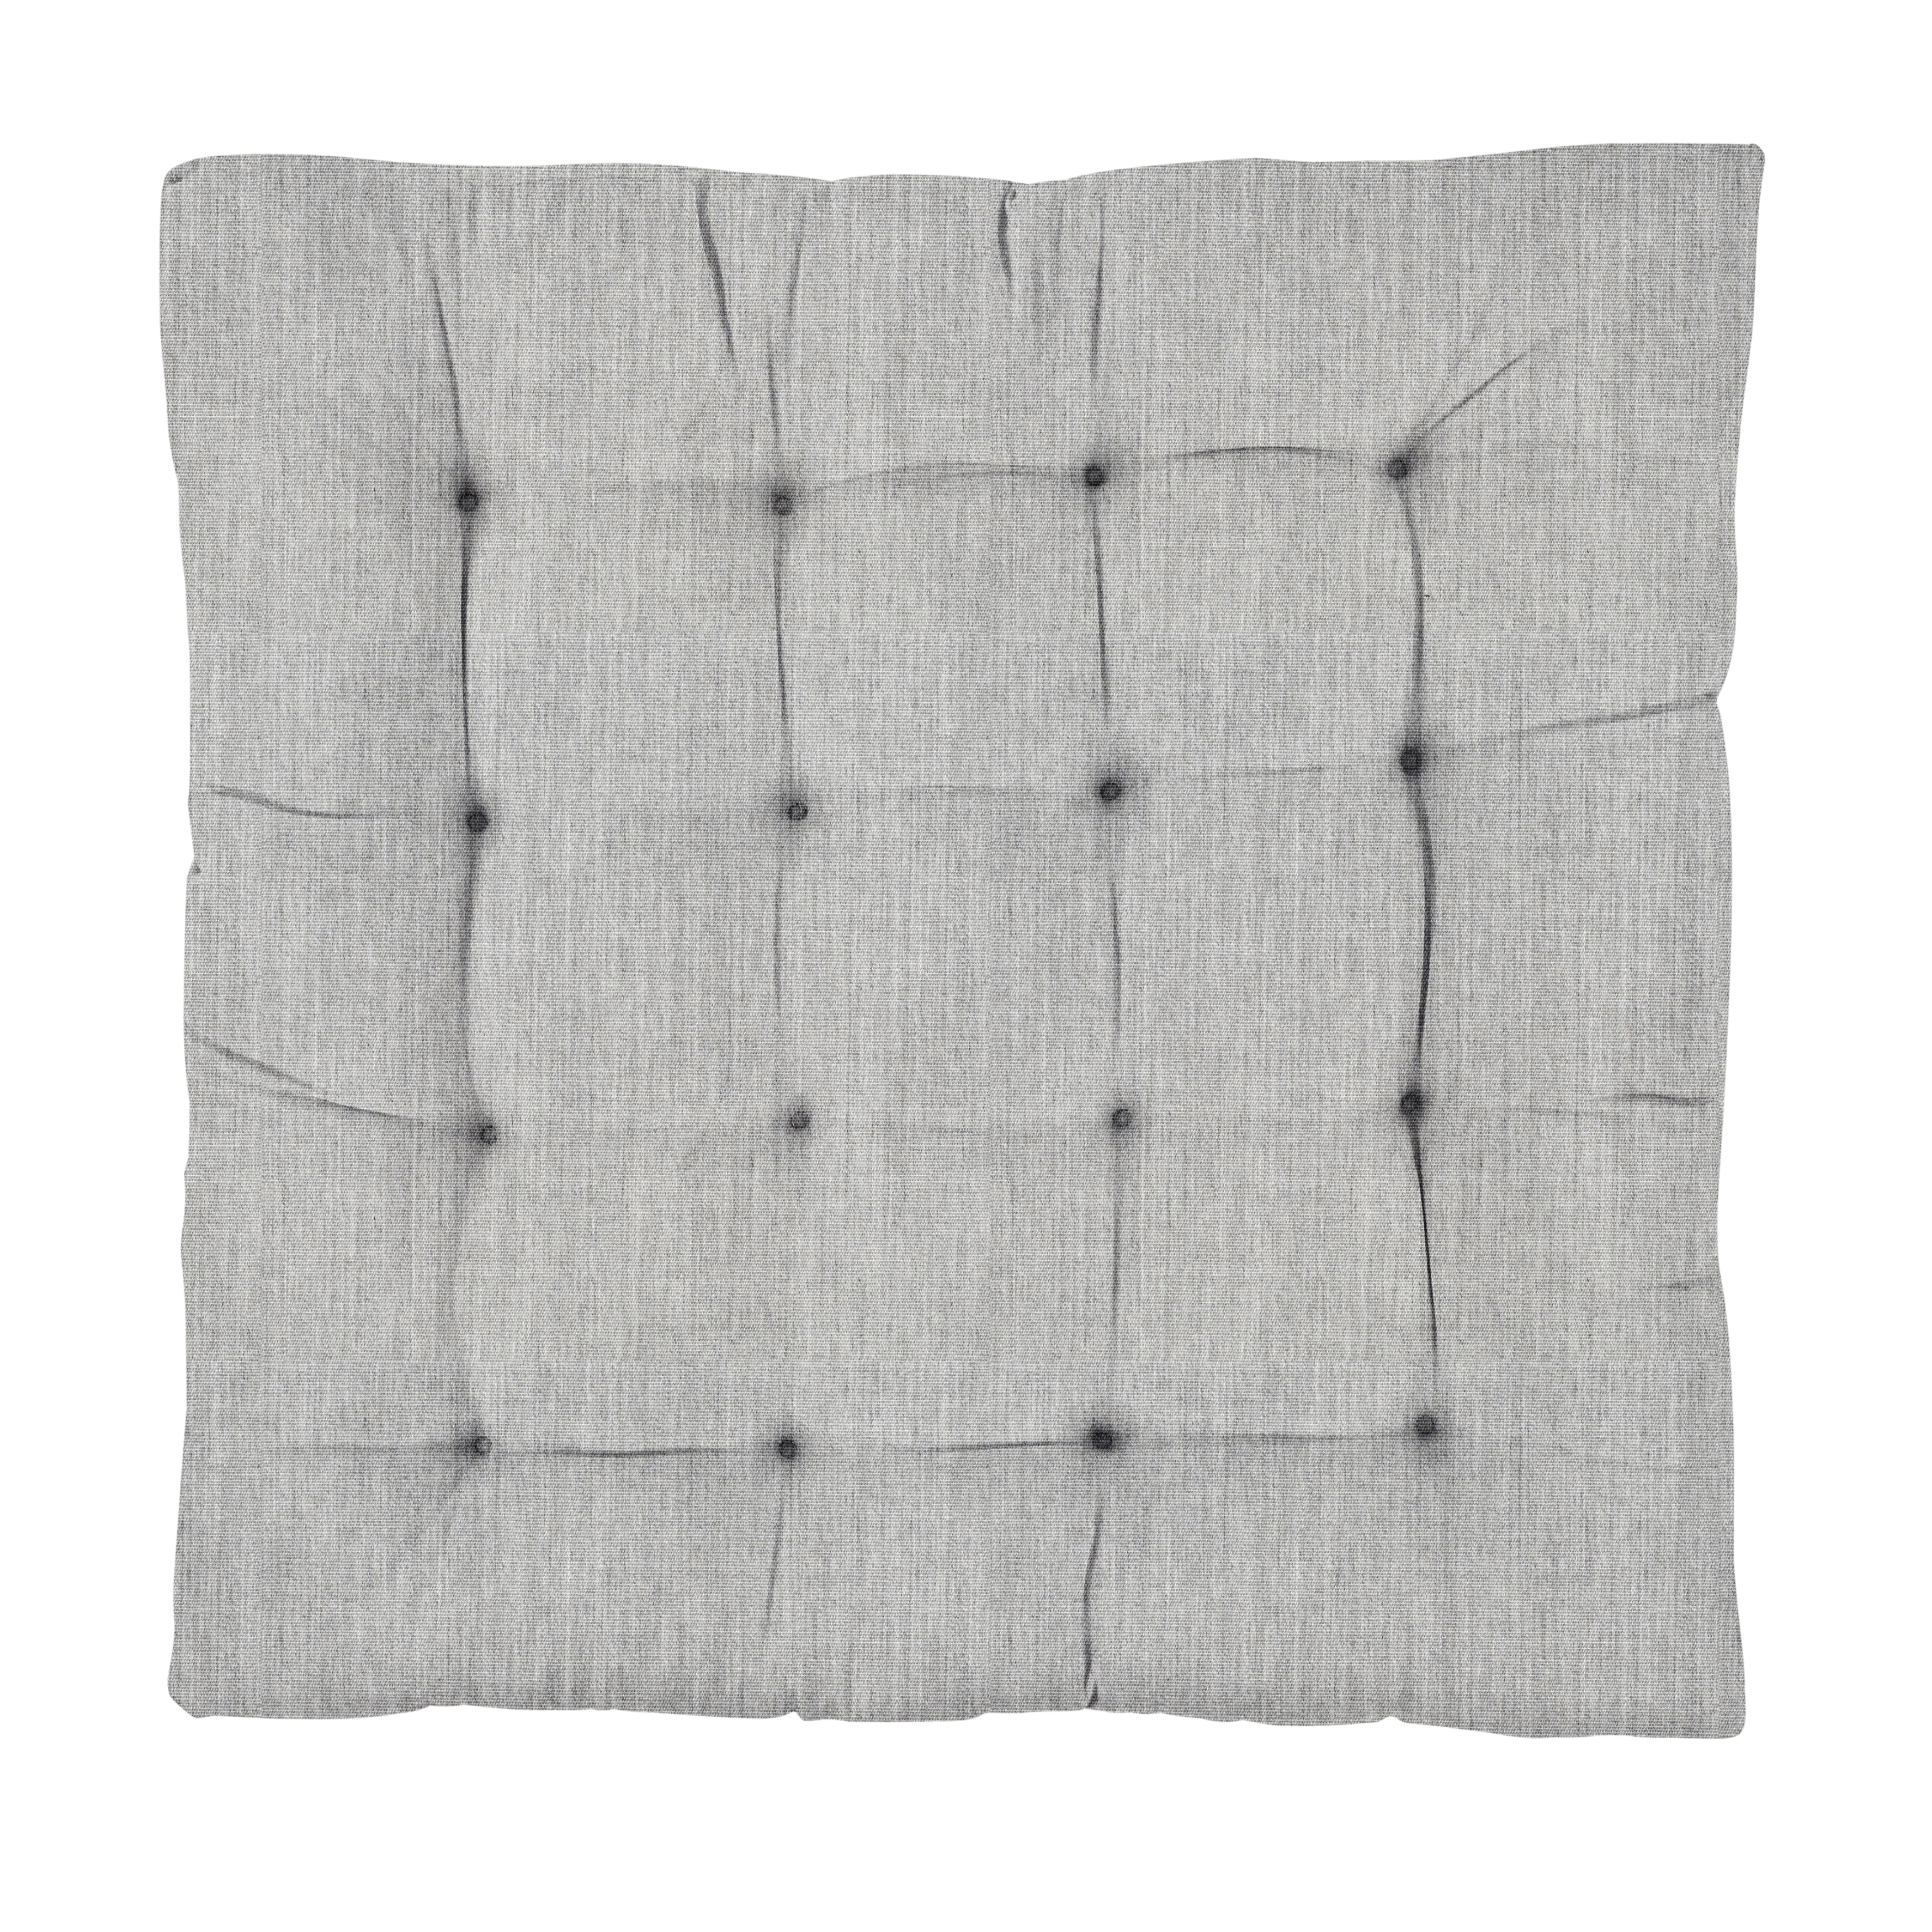 Humble + Haute Large Sunbrella Square Tufted Floor Pillow with